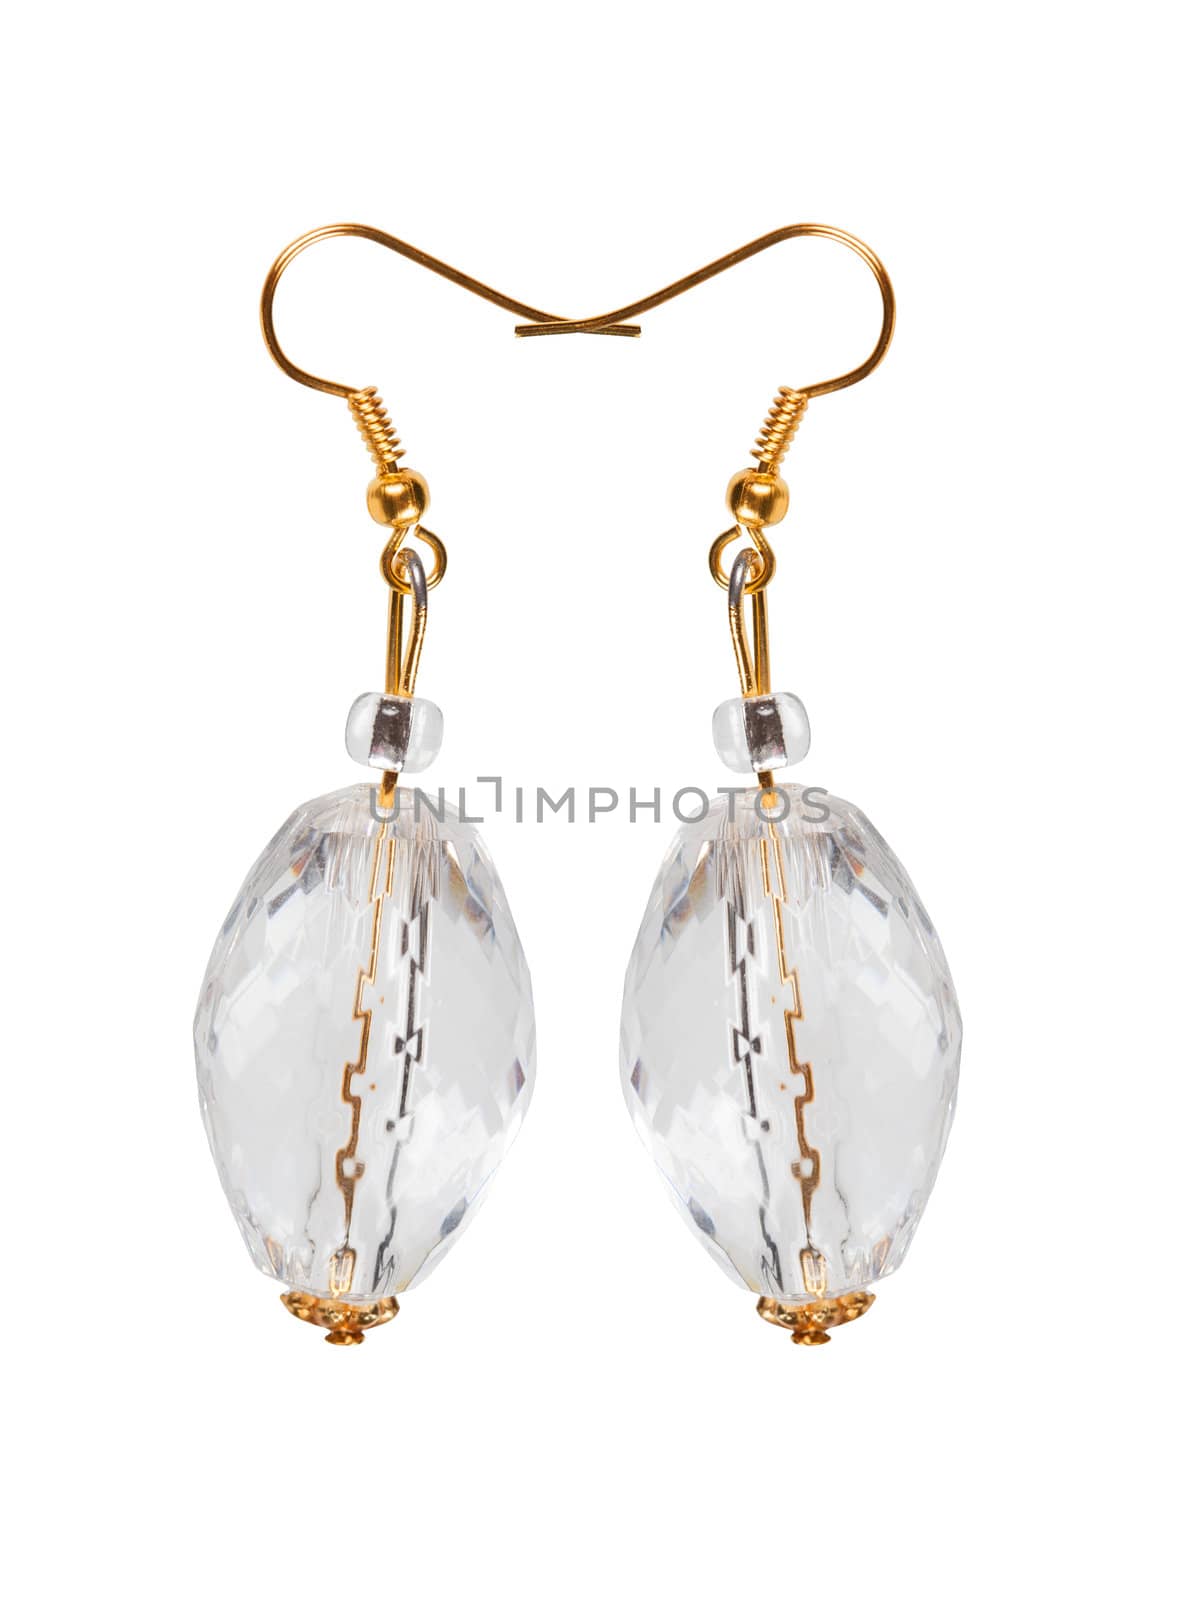 Earrings made of cut glass transparent by AleksandrN